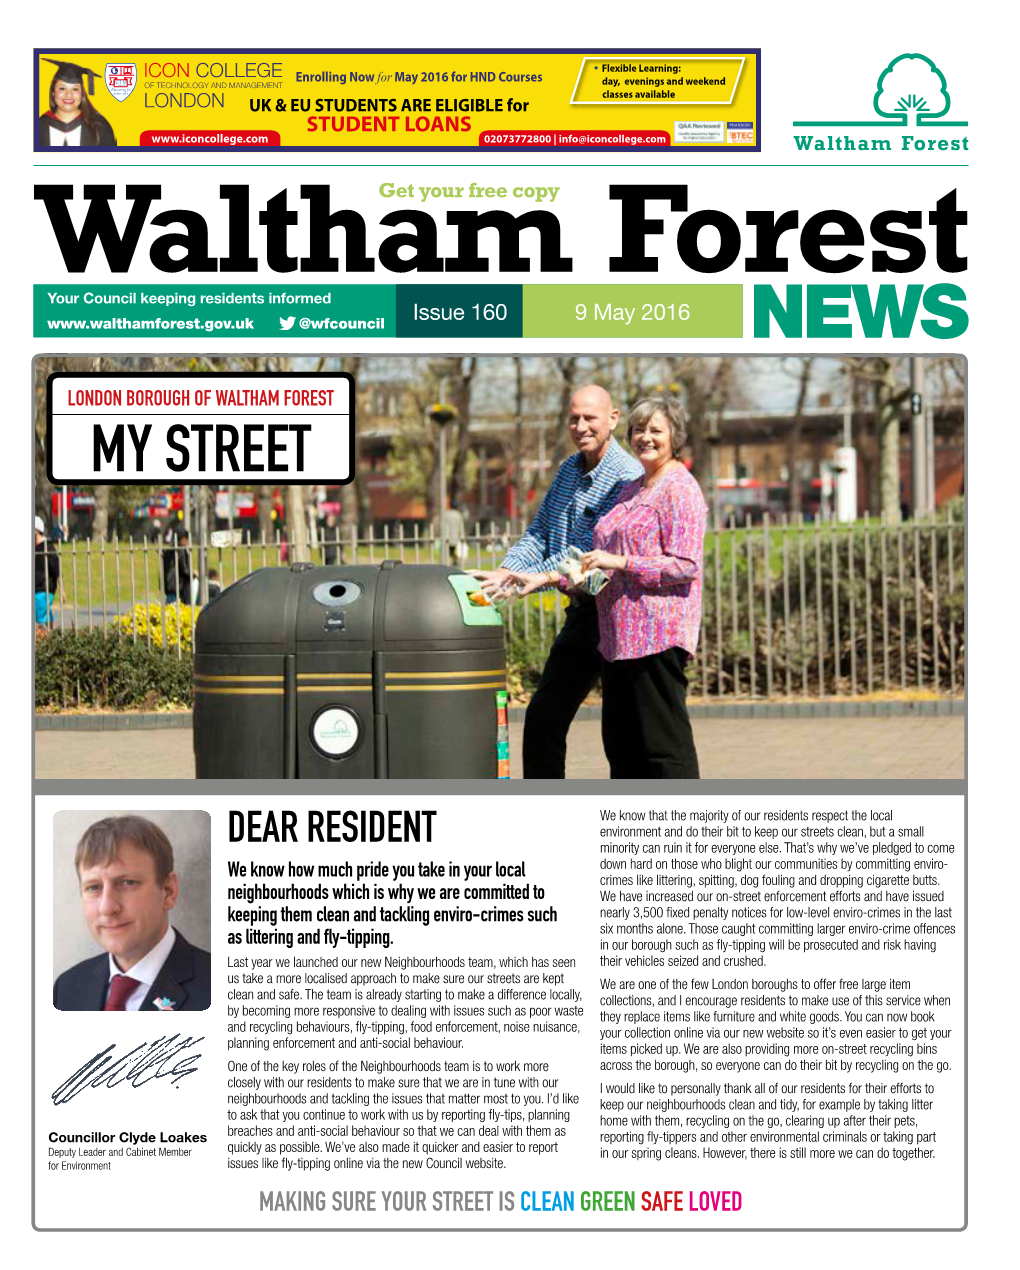 Issue 160 9 May 2016 @Wfcouncil